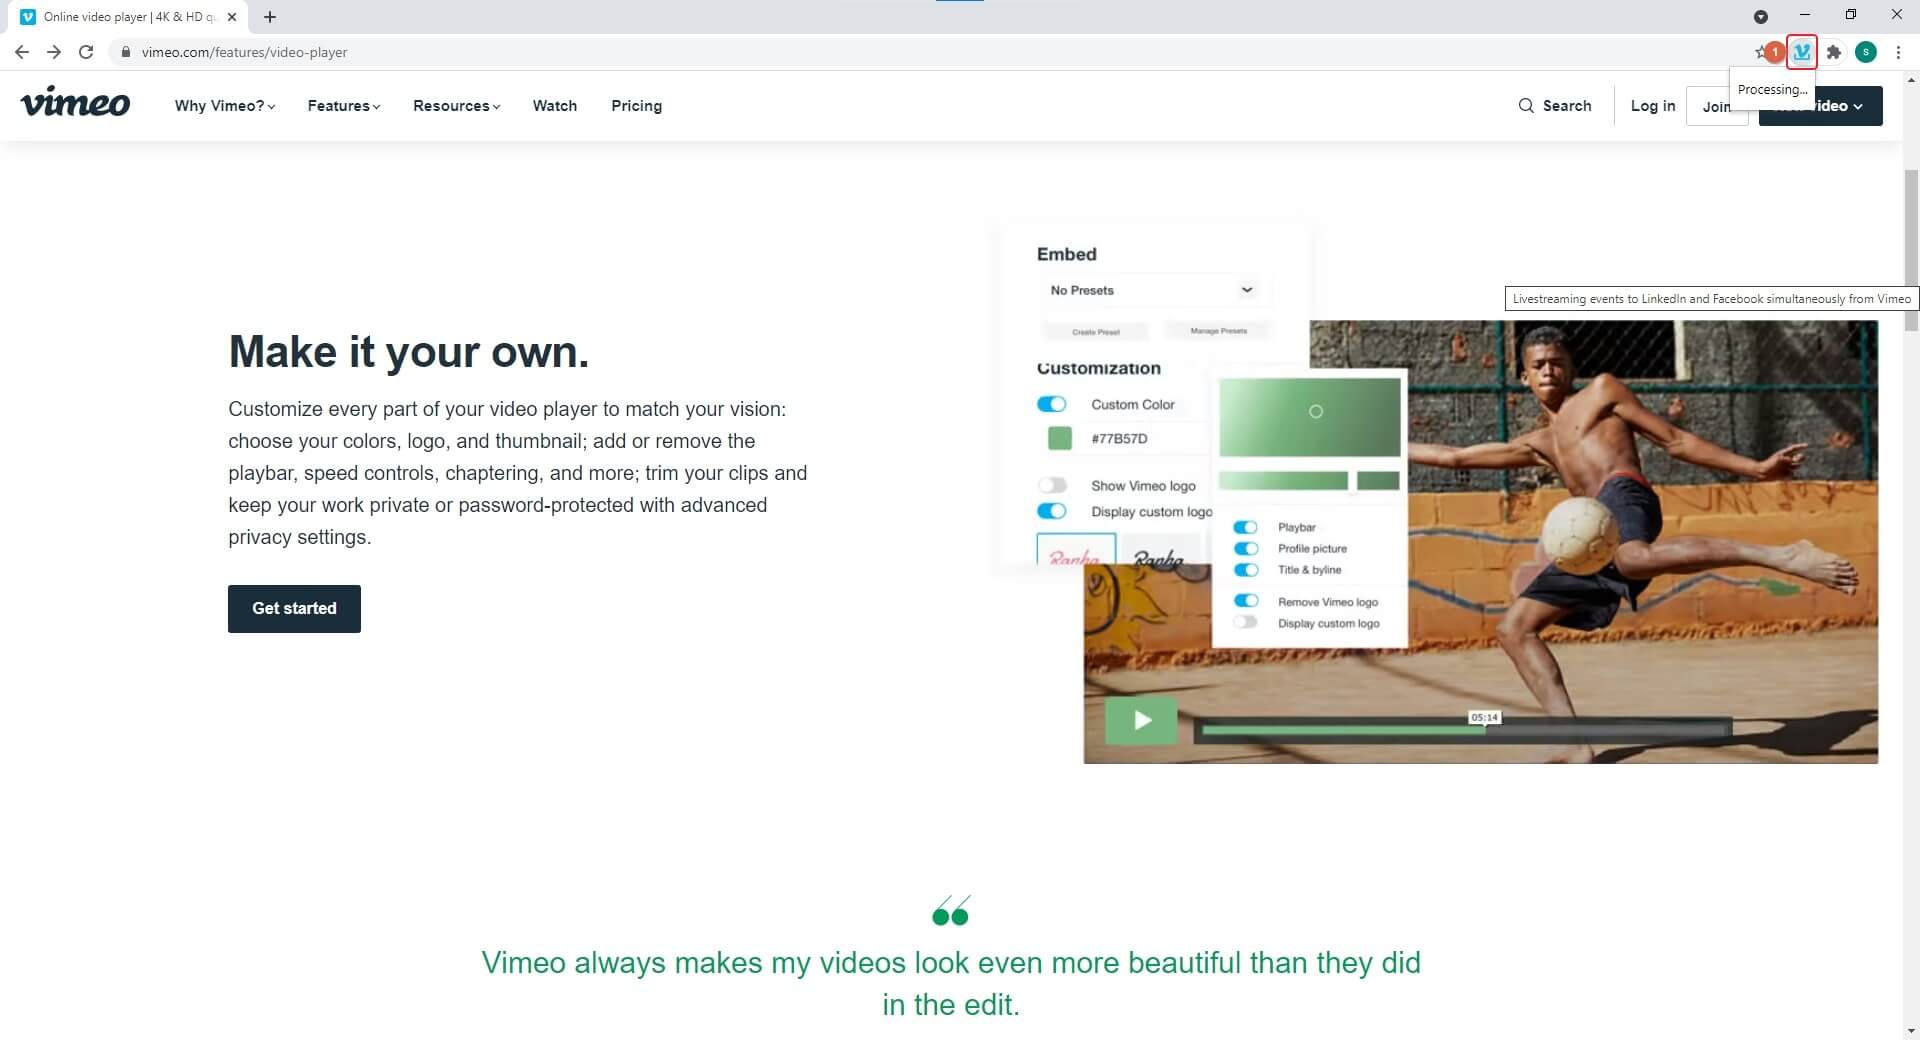  download  embed Vimeo video with Simple Vimeo Downloader 